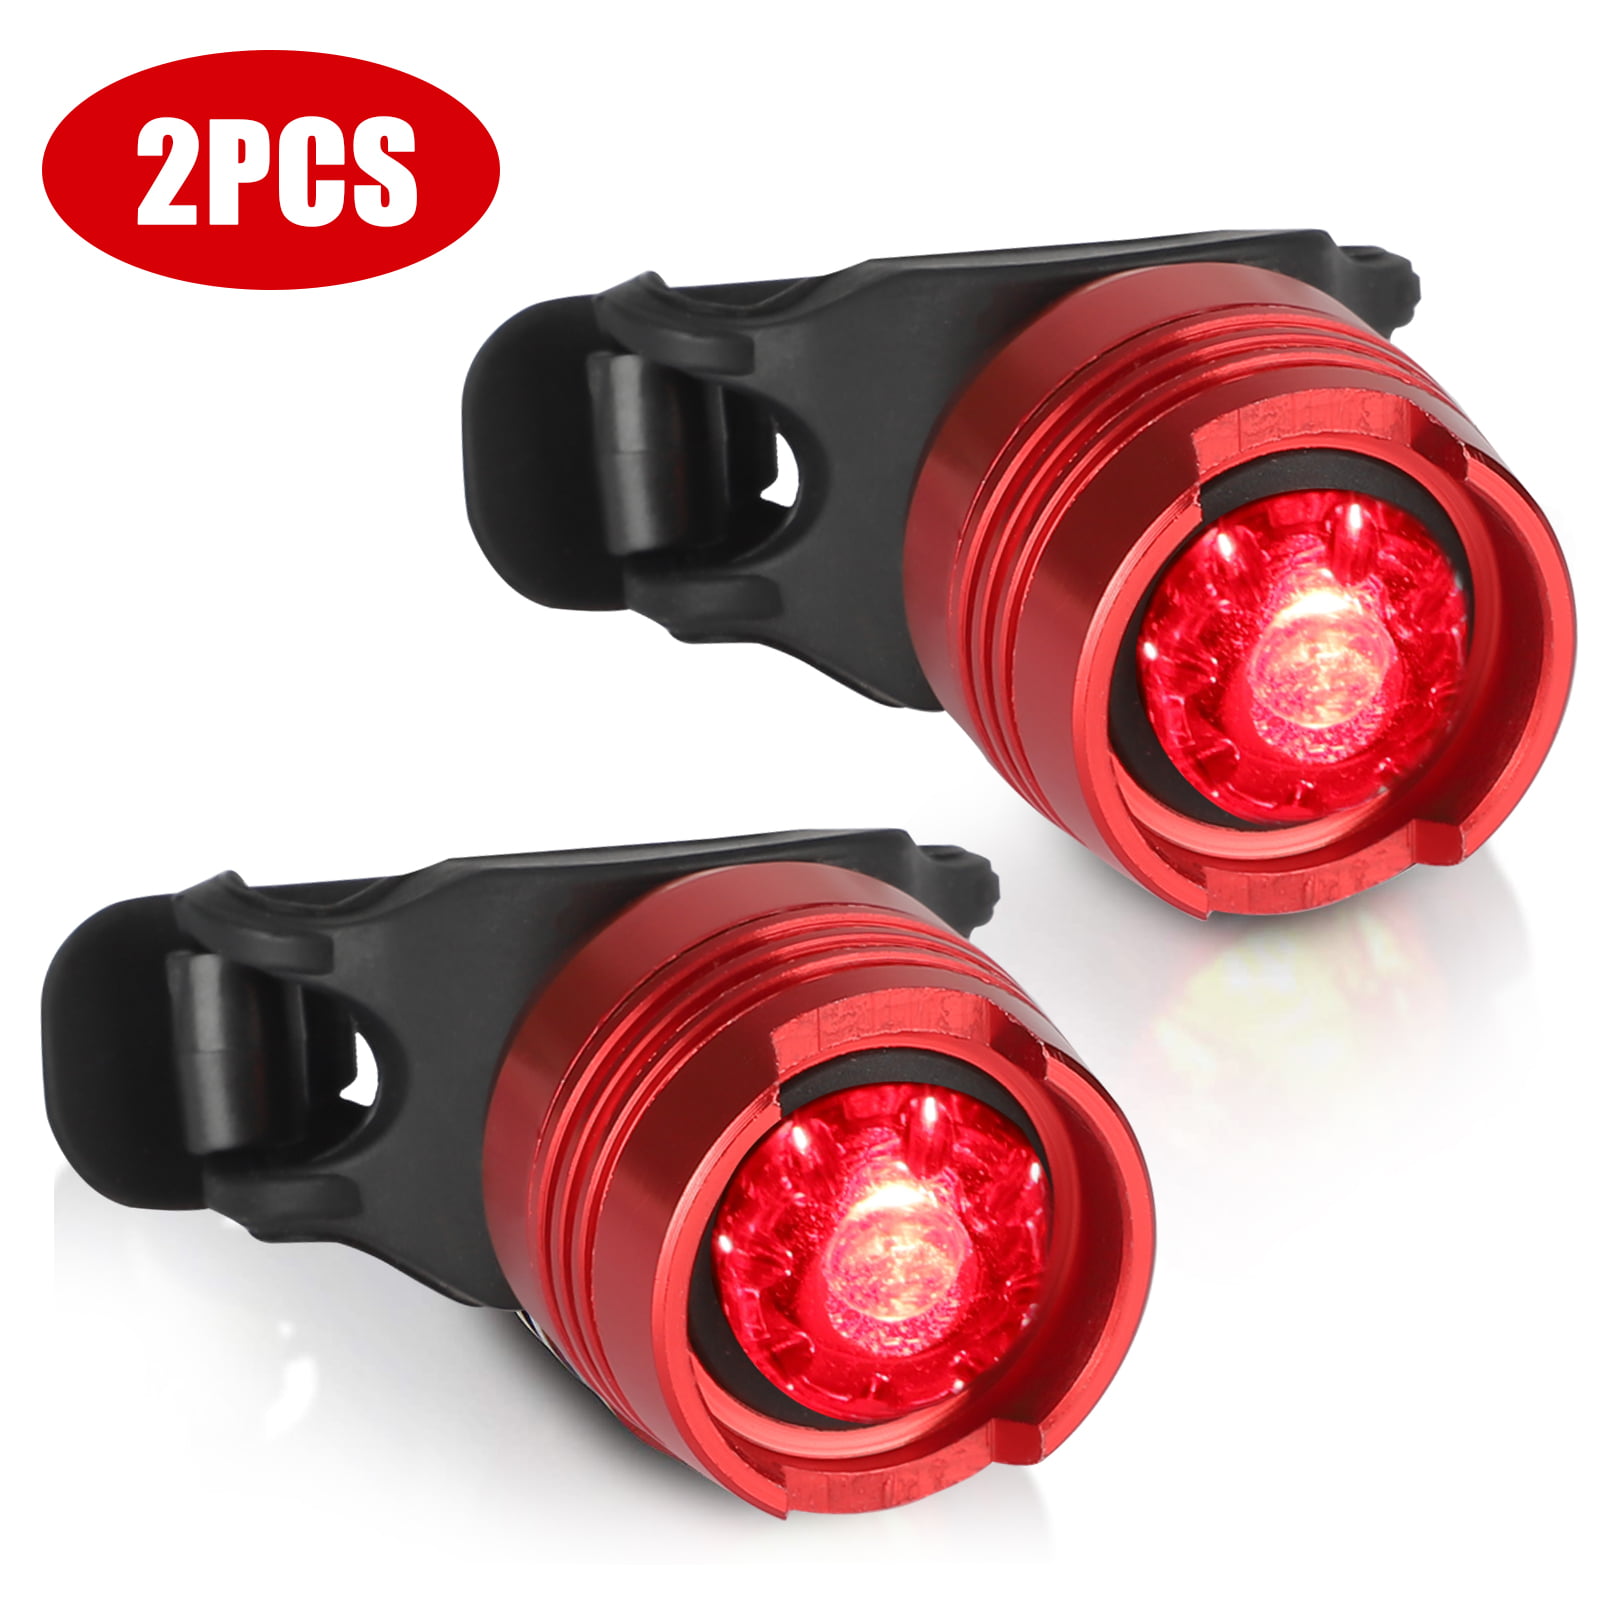 2 Pcs LED Rear Bike Tail Light, 3 Mode Options, Waterproof Ultra Bright Bicycle Tail Light, Red